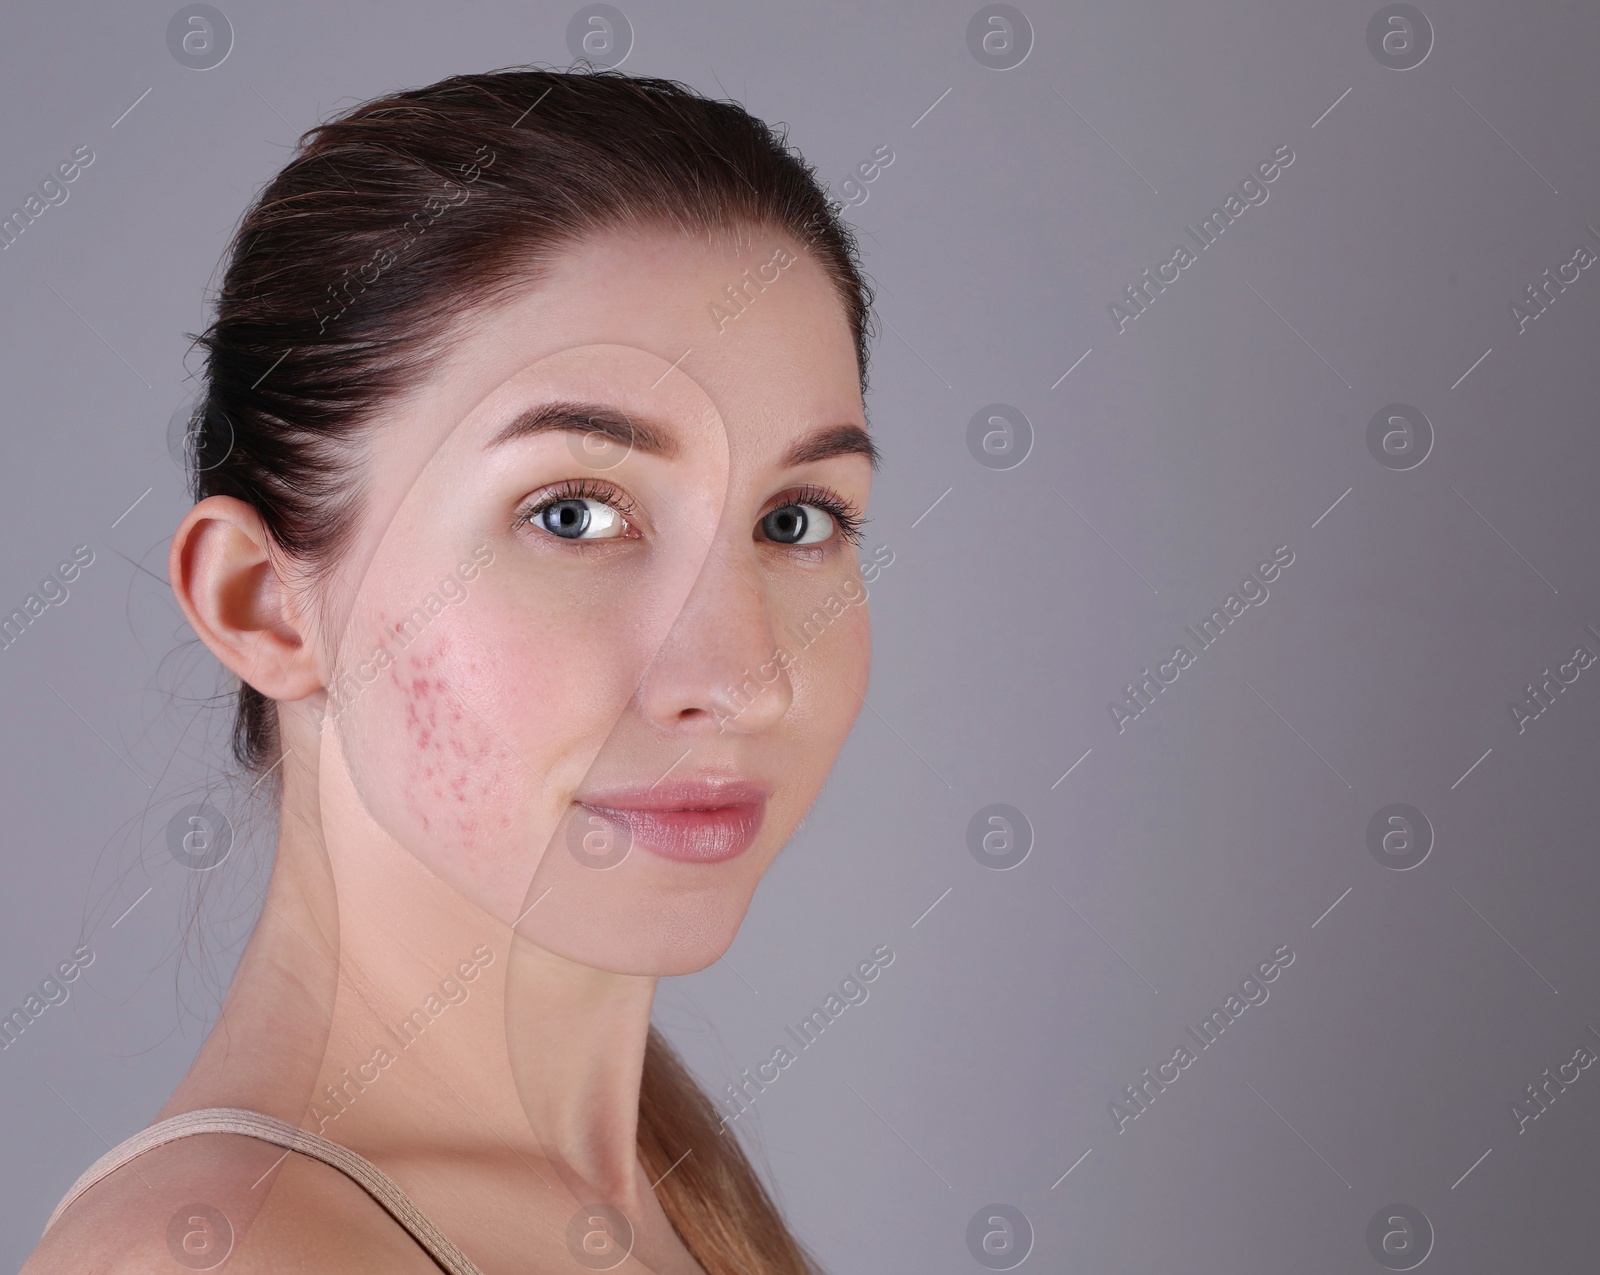 Image of Acne problem, collage. Woman before and after treatment on grey background, space for text